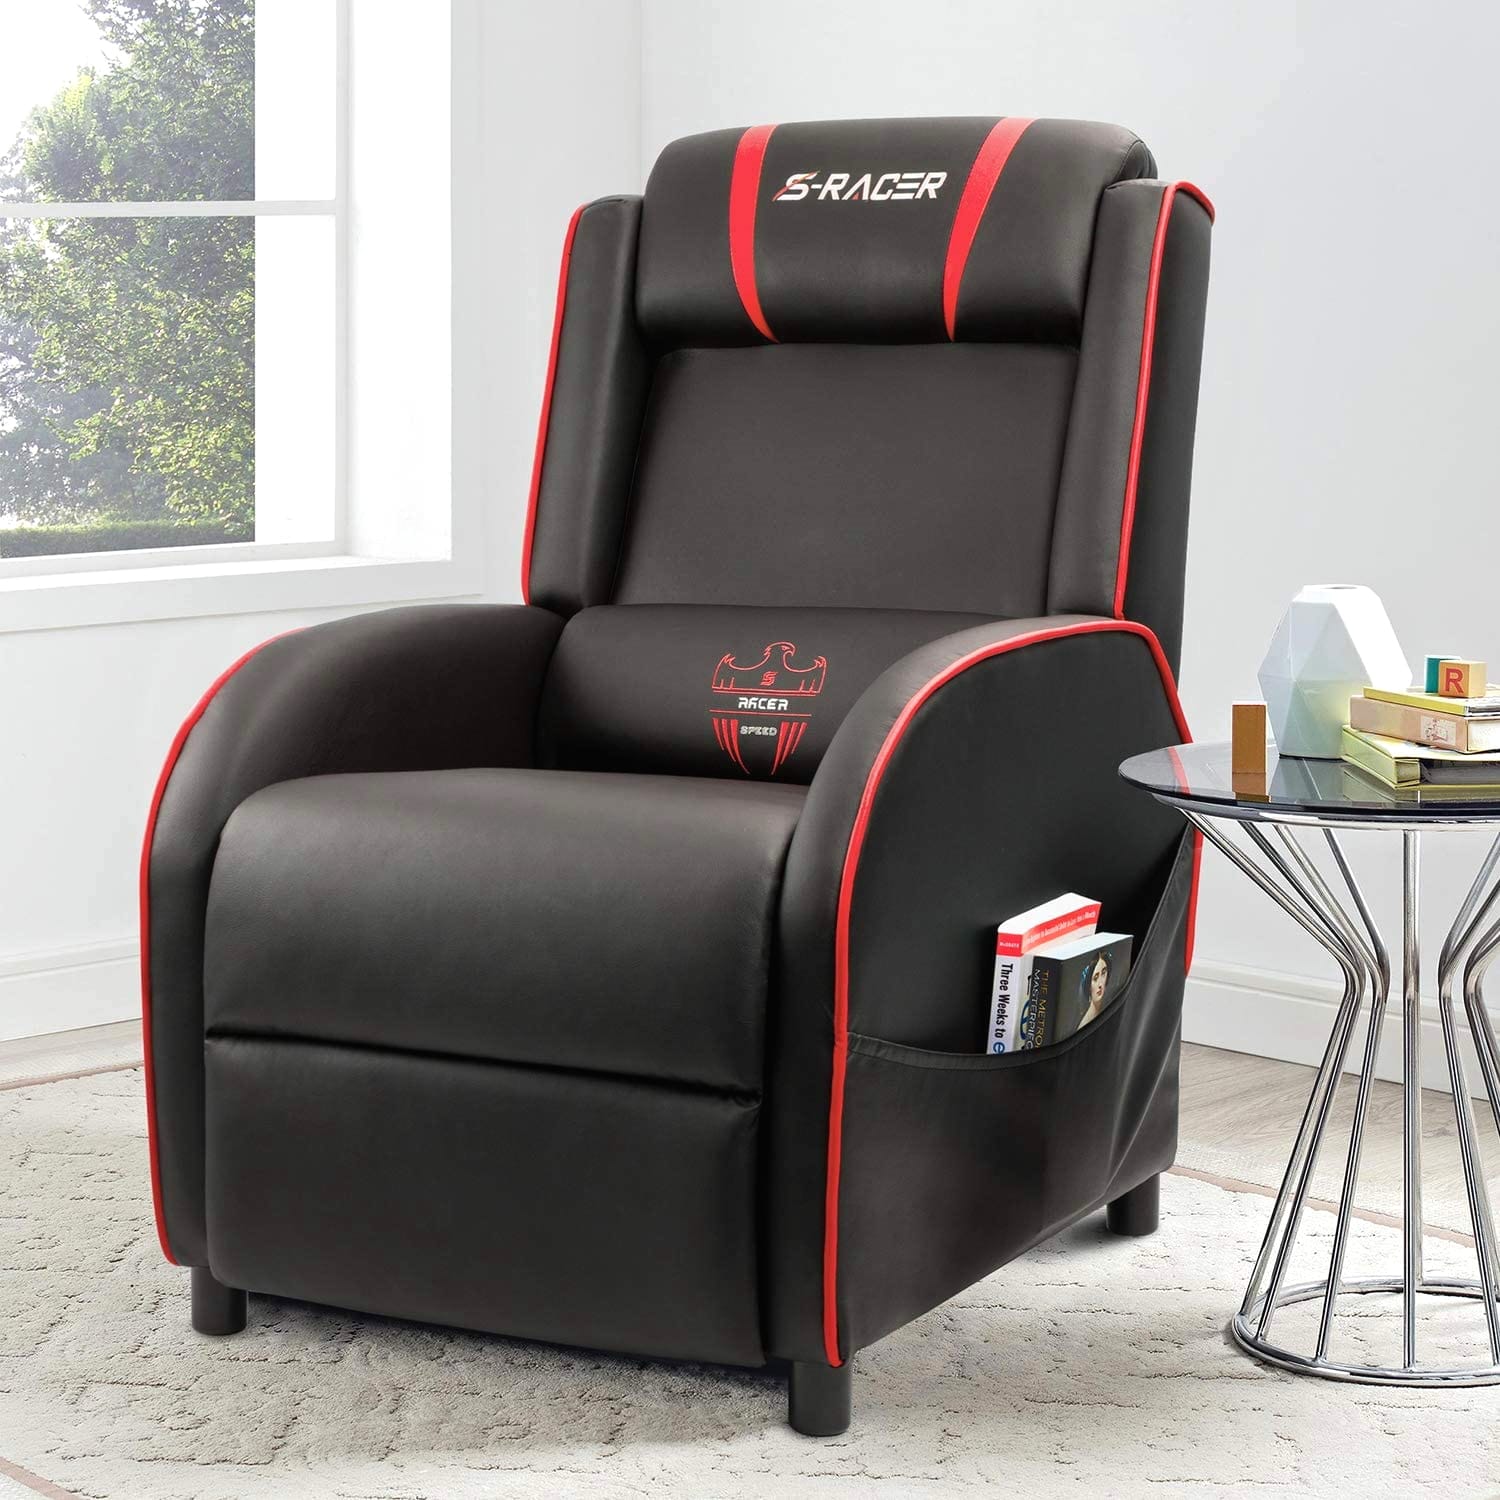 Homall Gaming Recliner Chair Sept 2021 Specs Features Pros And Cons